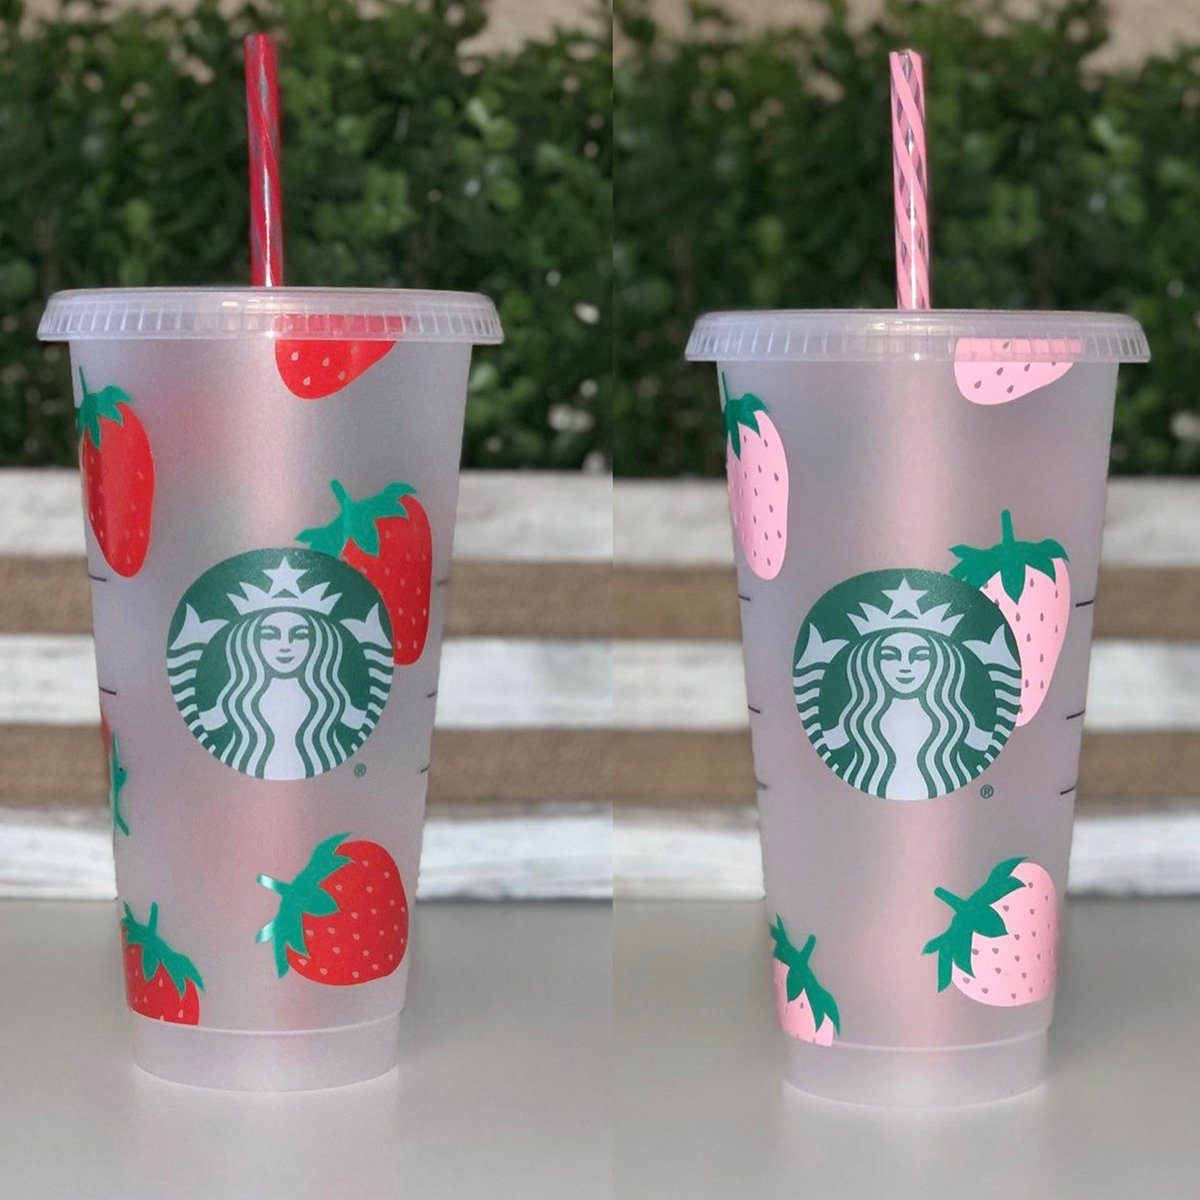 Strawberry Starbucks Cold Cup